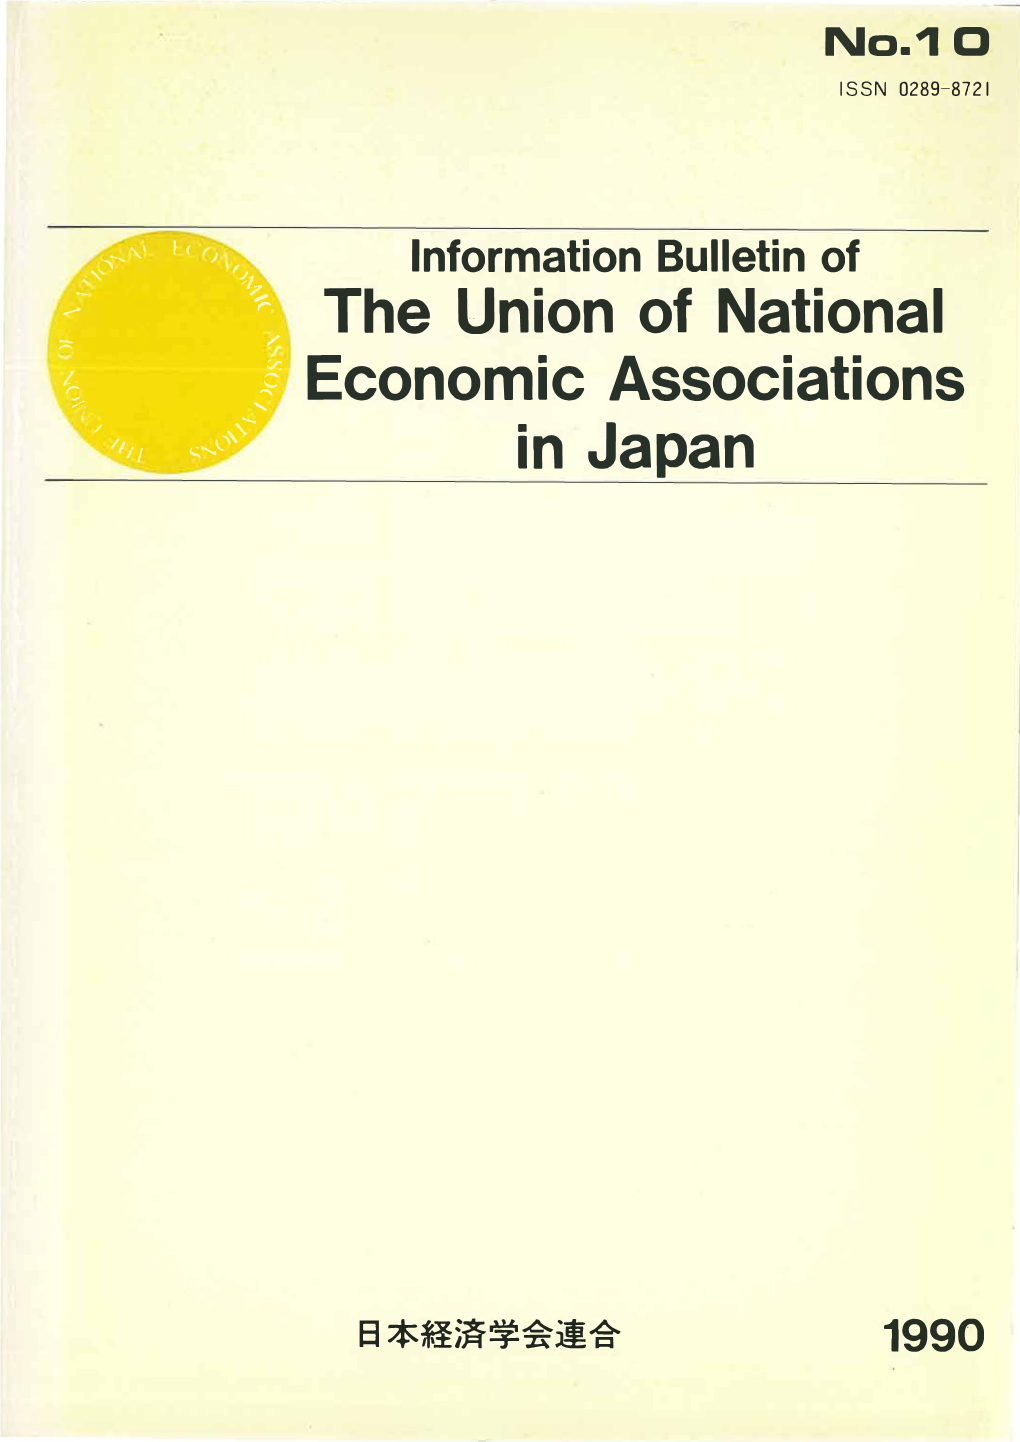 The Union of National Economic Associations in Japan